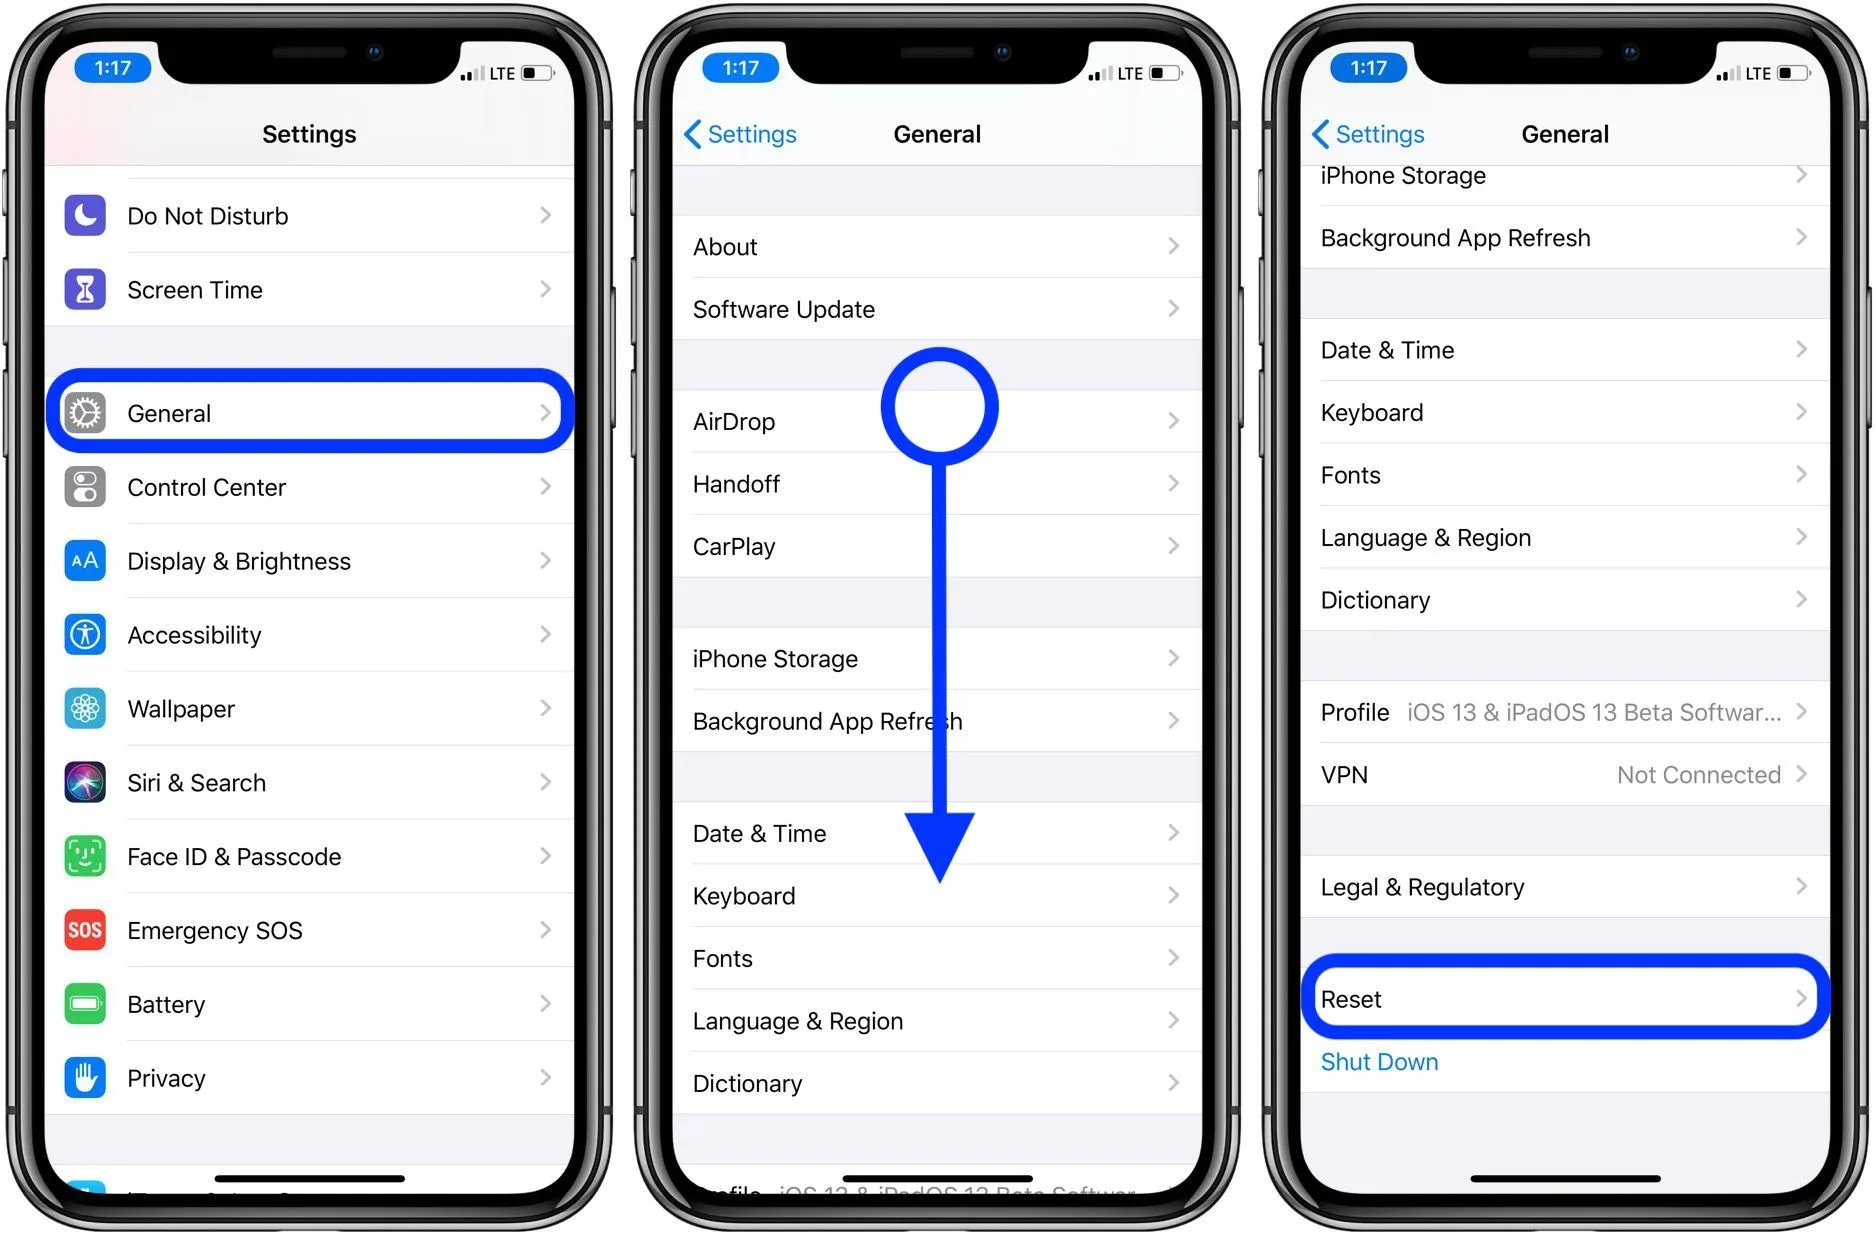 IPhone 11 Auto-Restart: Troubleshooting And Solutions For Spontaneous Restarts